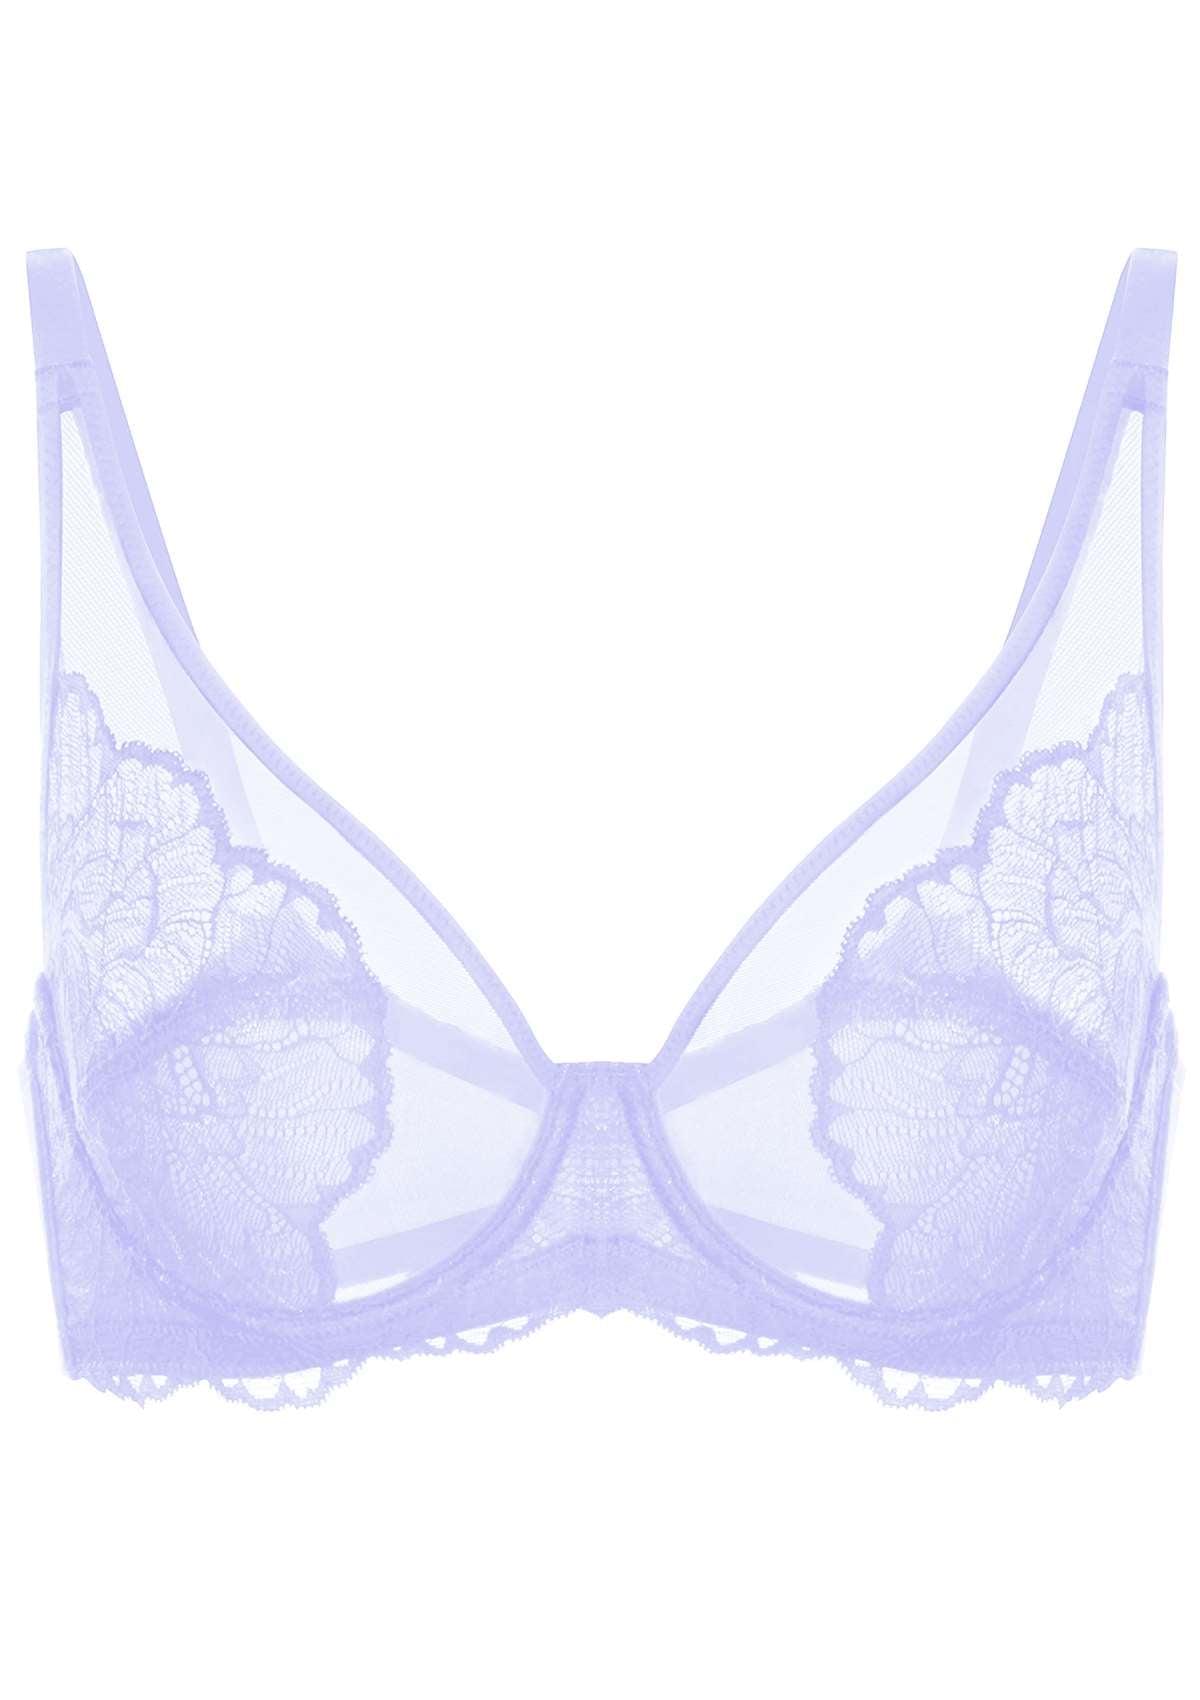 HSIA Blossom Transparent Lace Bra: Plus Size Wired Back Smoothing Bra - Purple / 38 / D